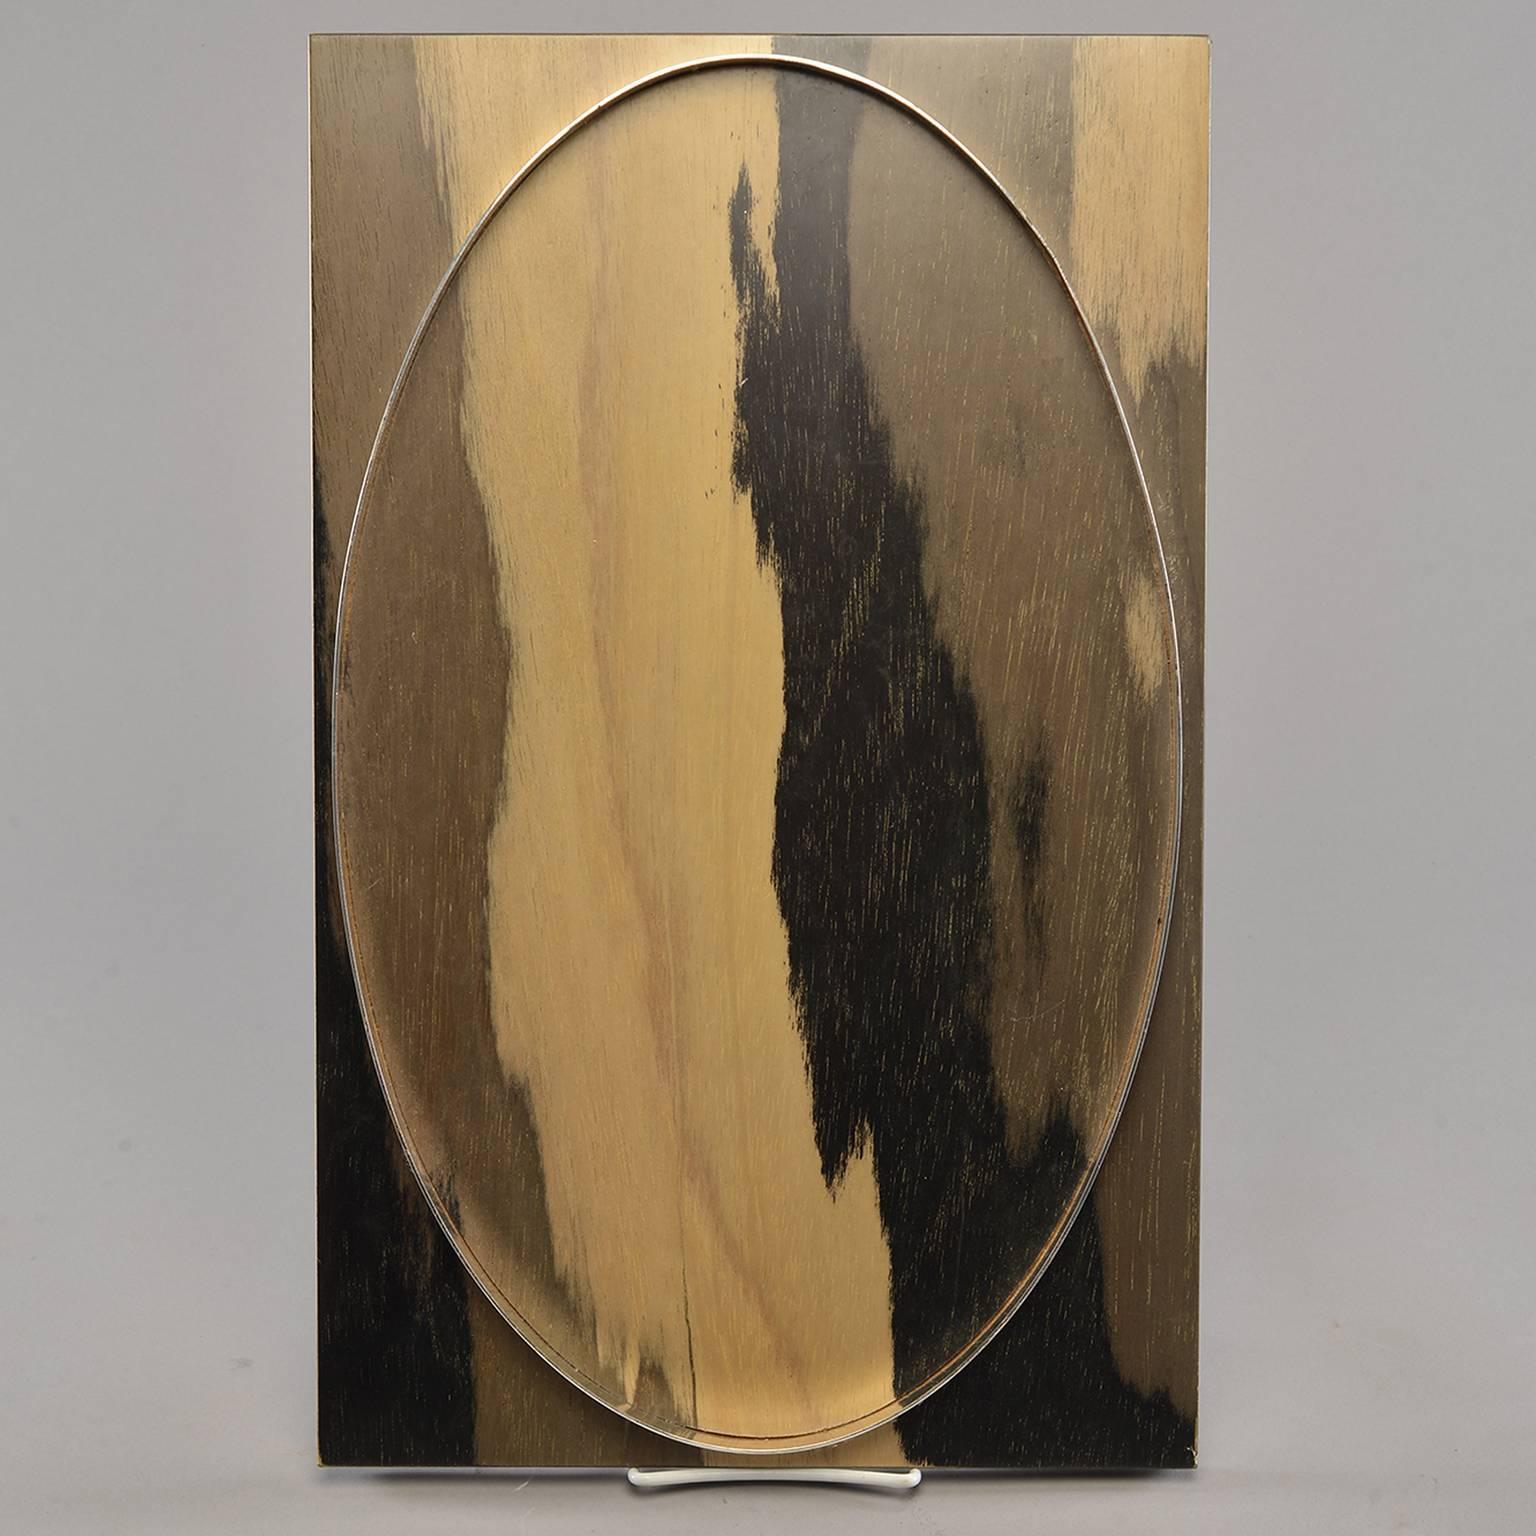 Wood tray found in Italy features rectangular hand stained wood tray in contrasting tones of gold, taupe and black with raised, silver tone metal insert and footed base, circa 1990s. Two available at time of this posting.